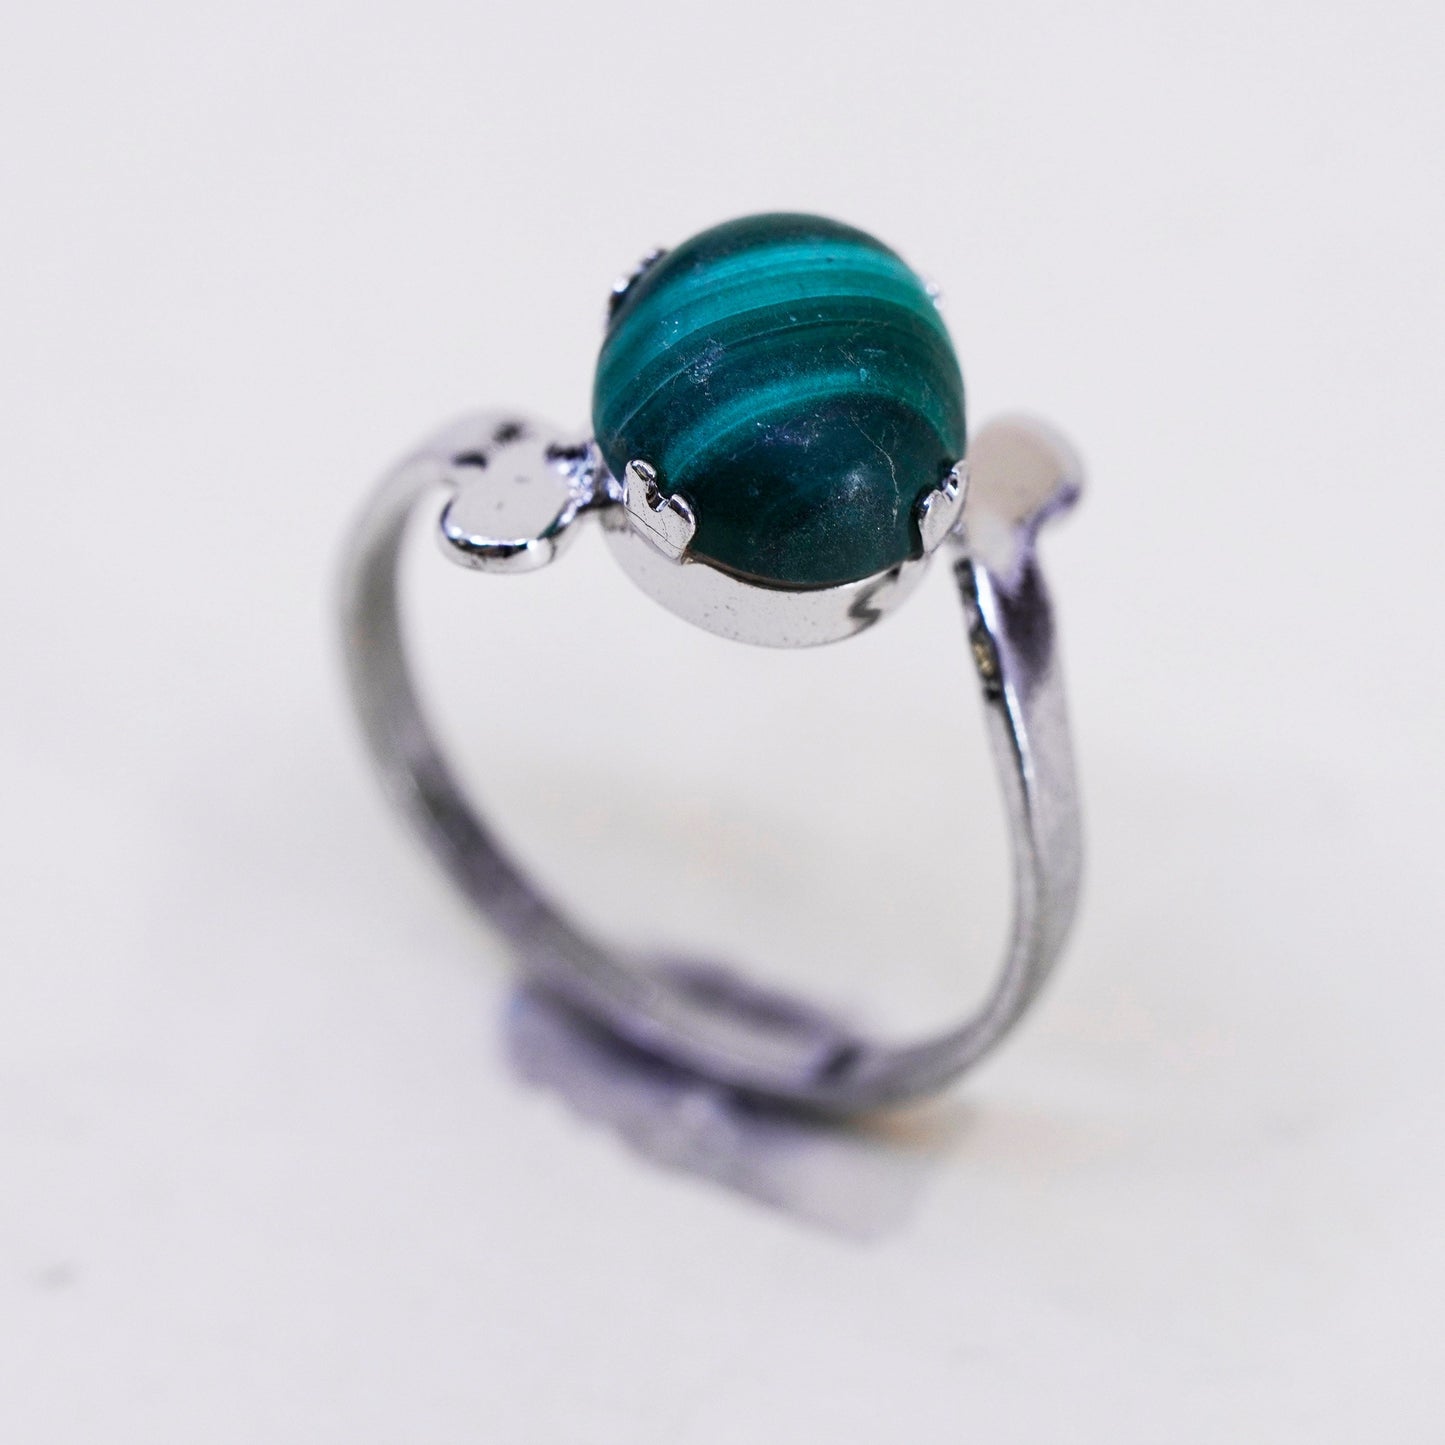 Size 6.5, southwestern Sterling 925 silver handmade ring with malachite